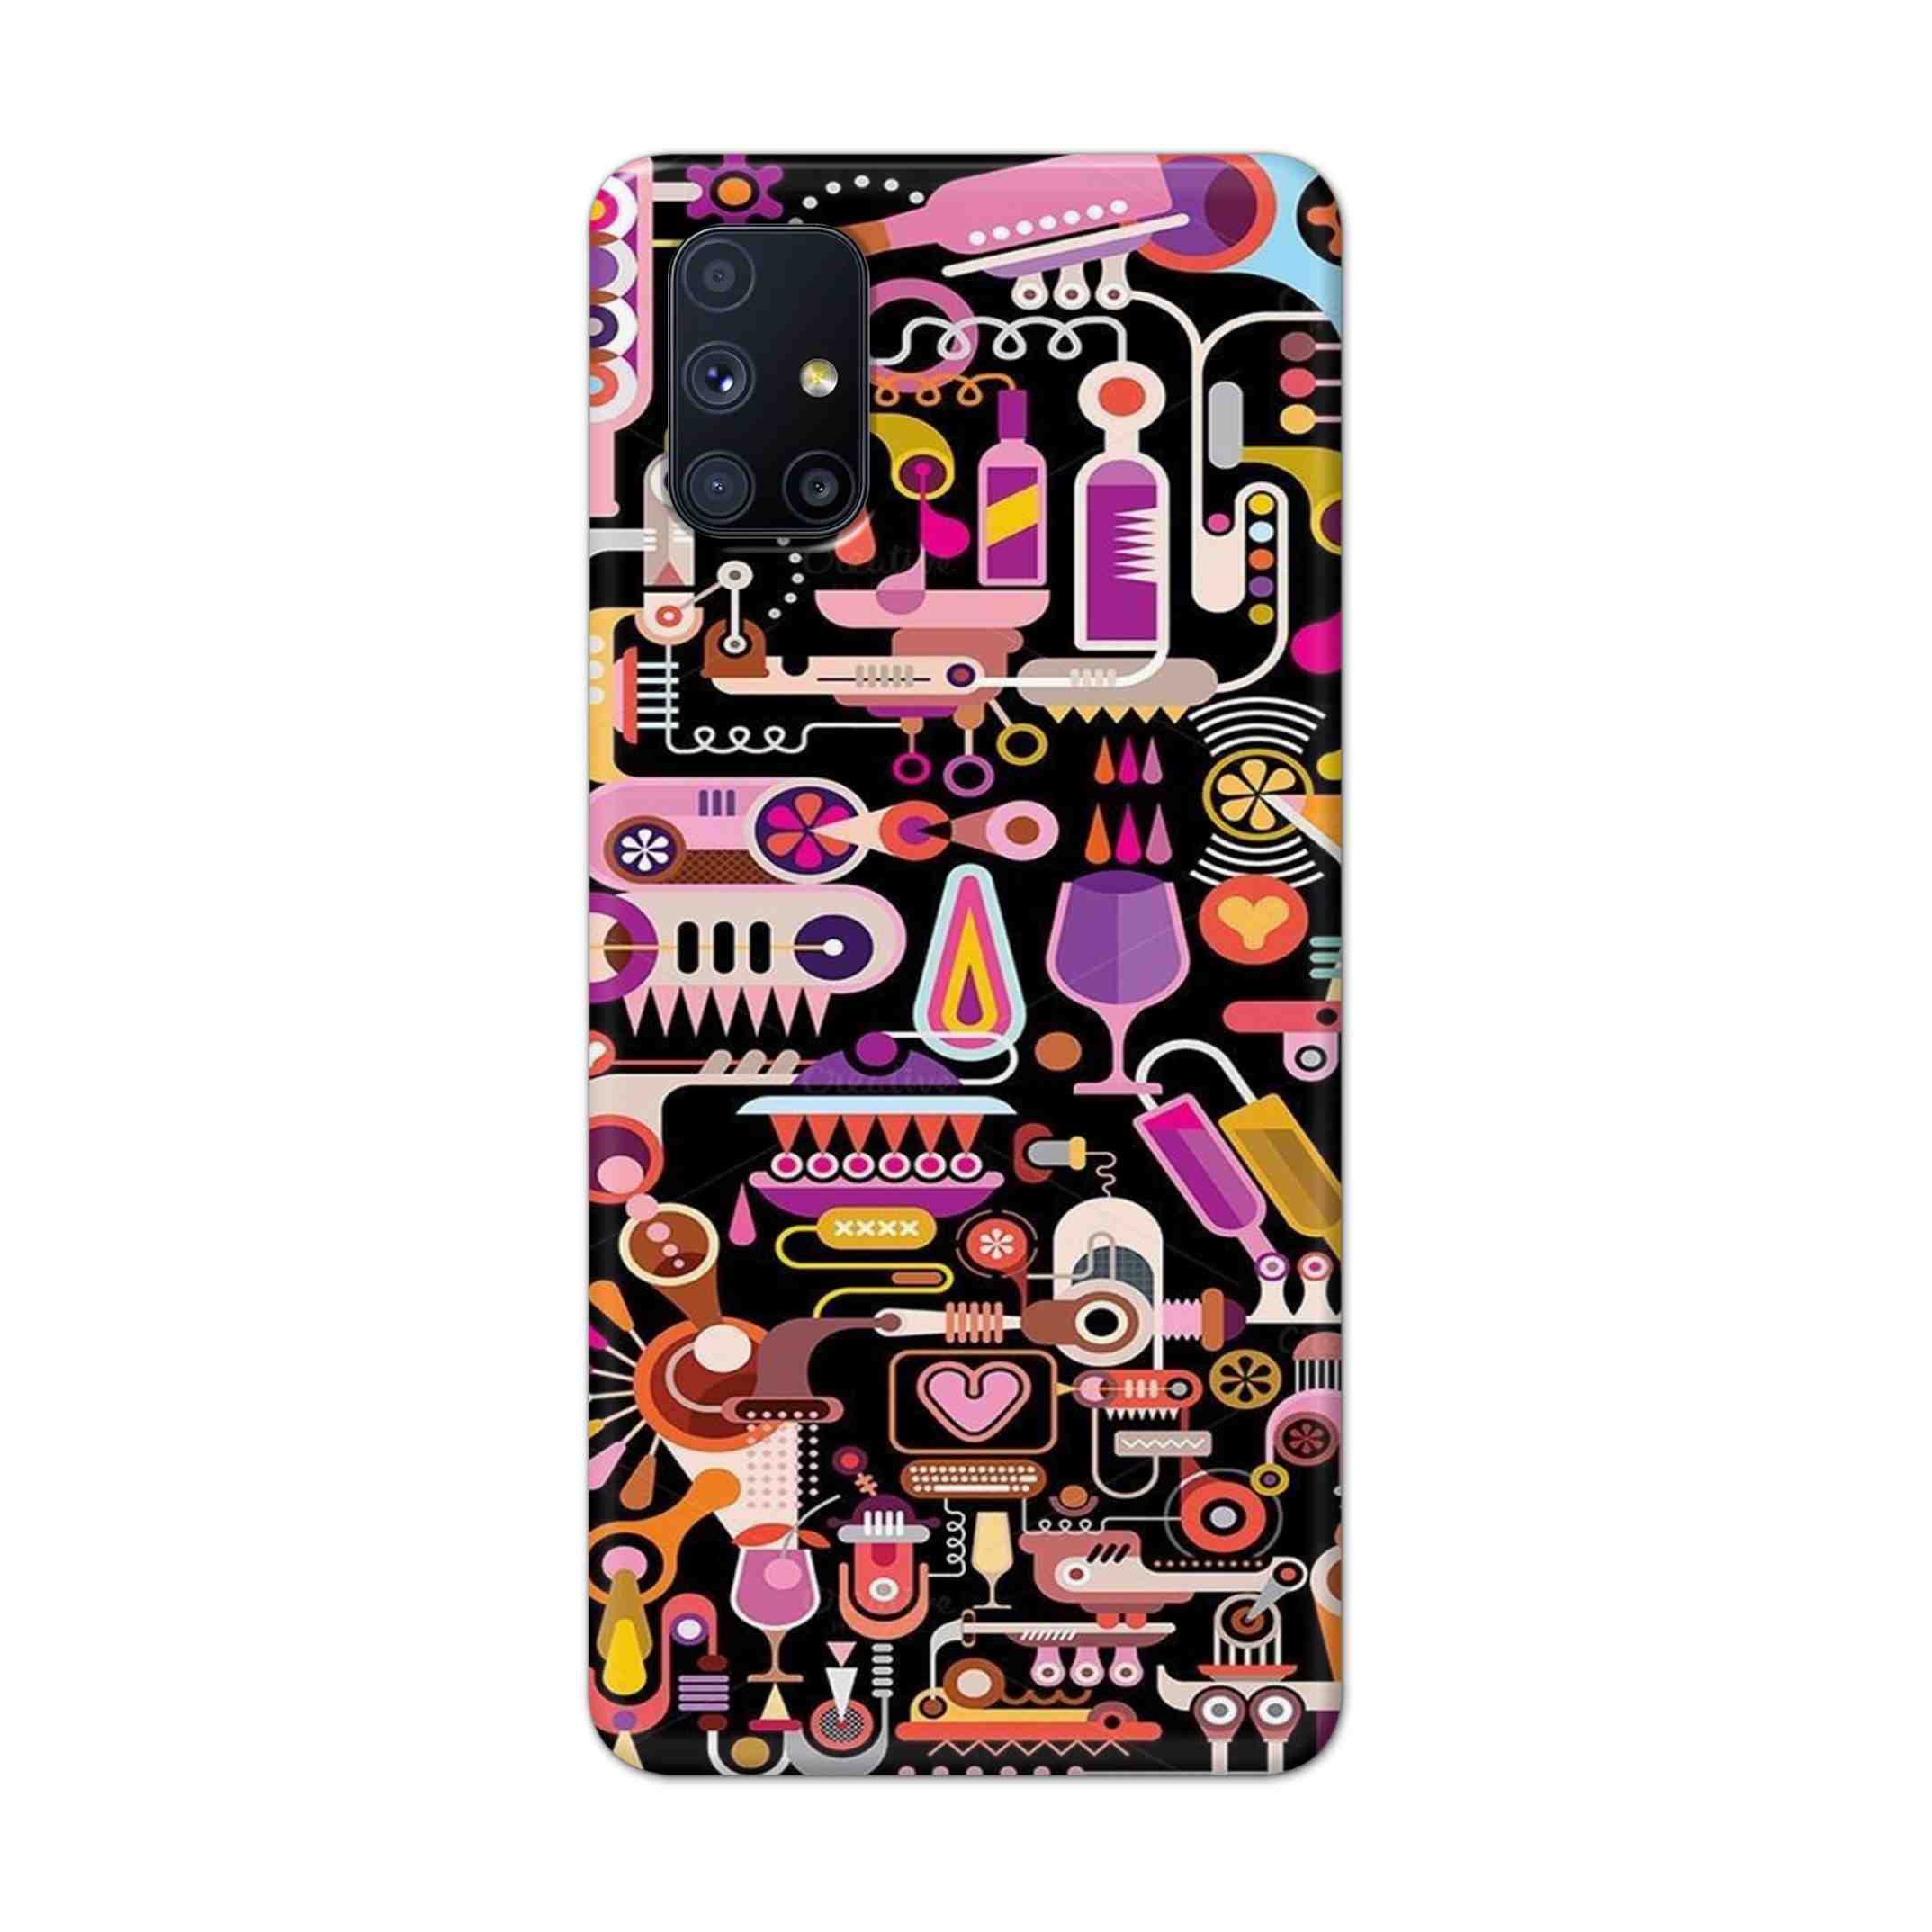 Buy Lab Art Hard Back Mobile Phone Case Cover For Samsung Galaxy M51 Online